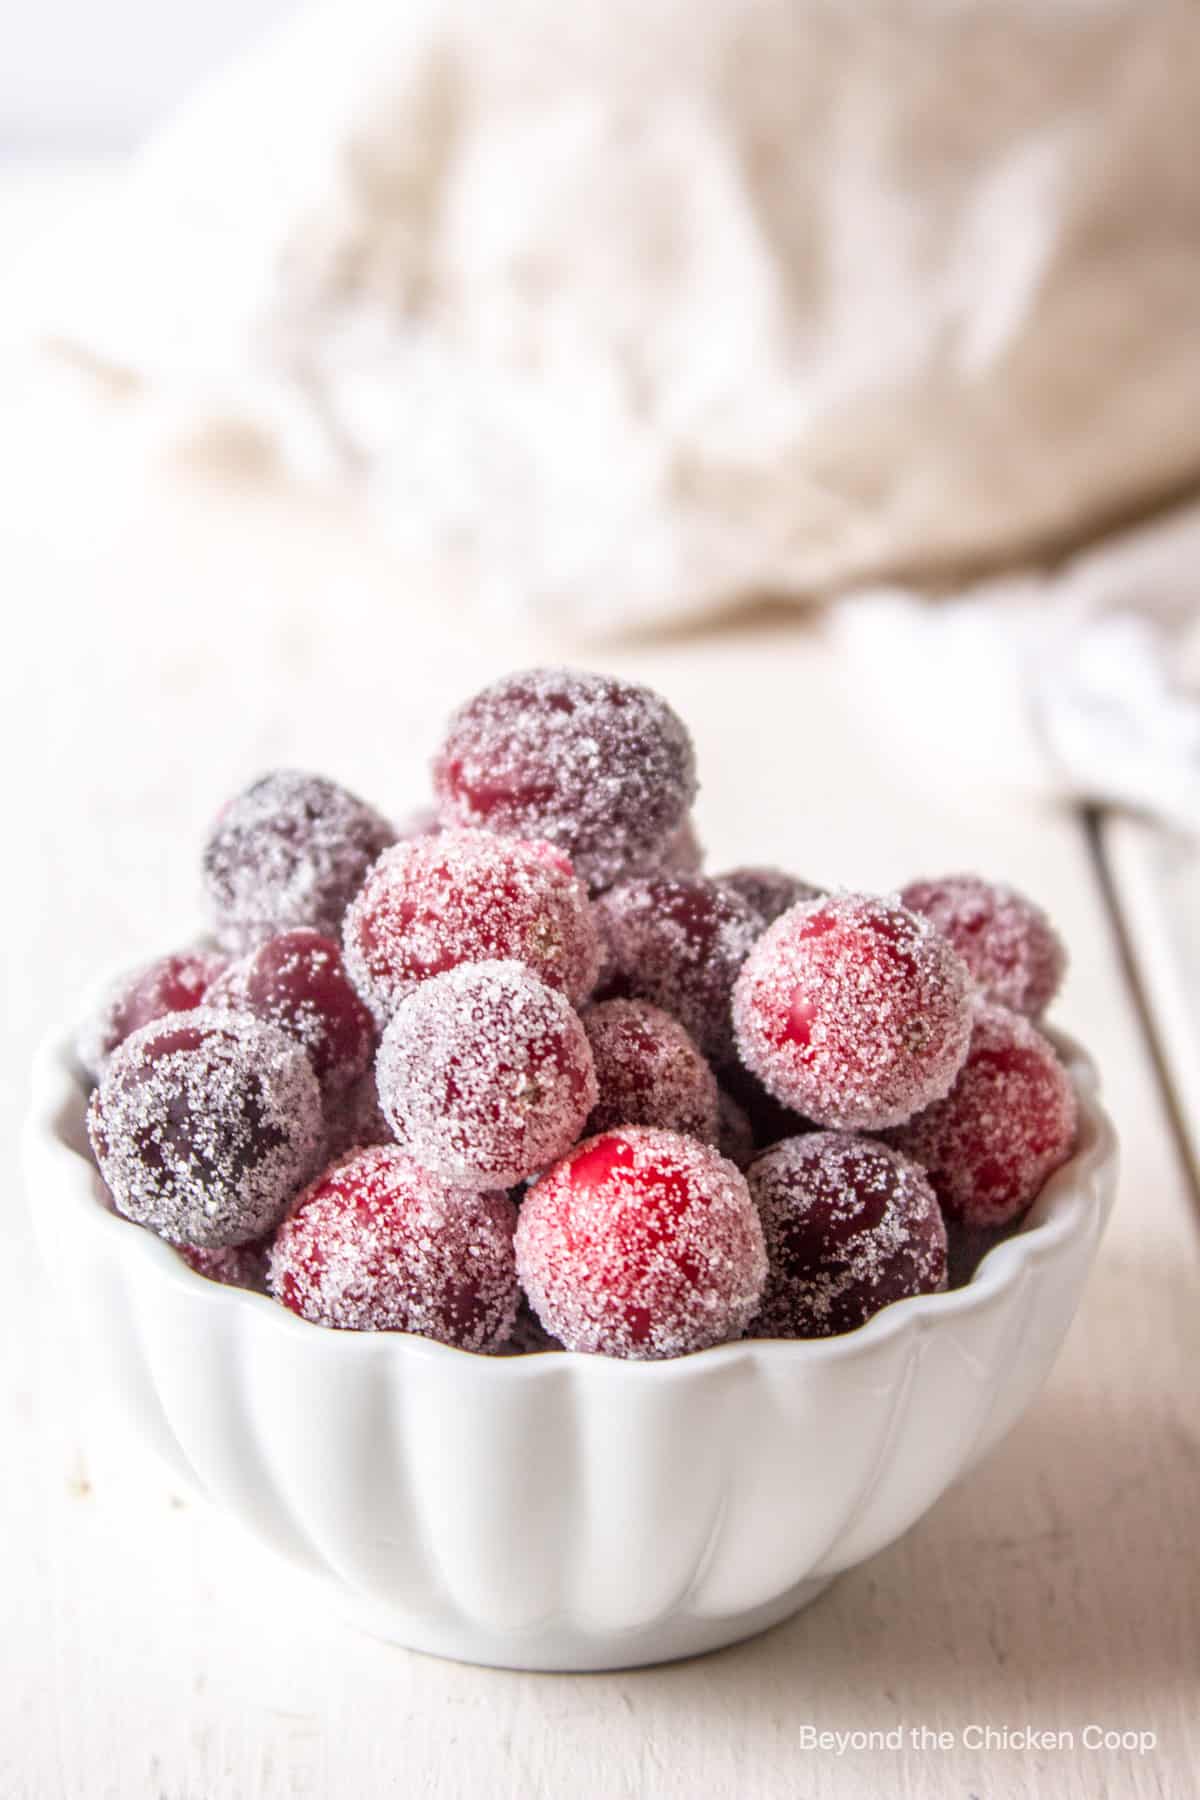 Small red berries covered with sugar.